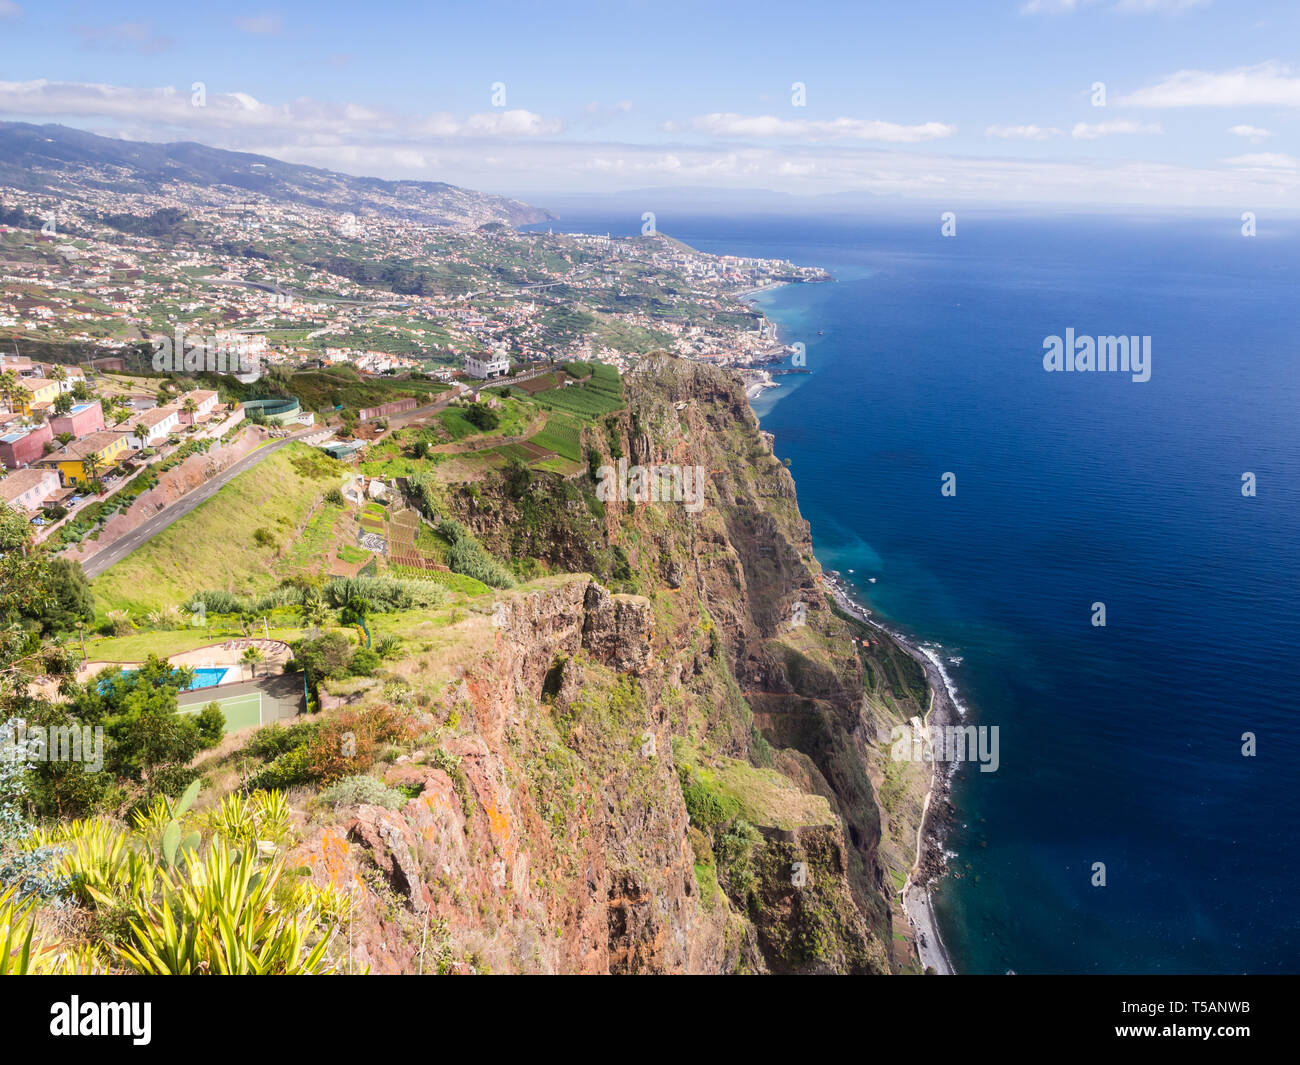 Aerial view of Funchal, the capital of Madeira island, Portugal, as seen from Cabo Girao Skywalk viewpoint. Stock Photo